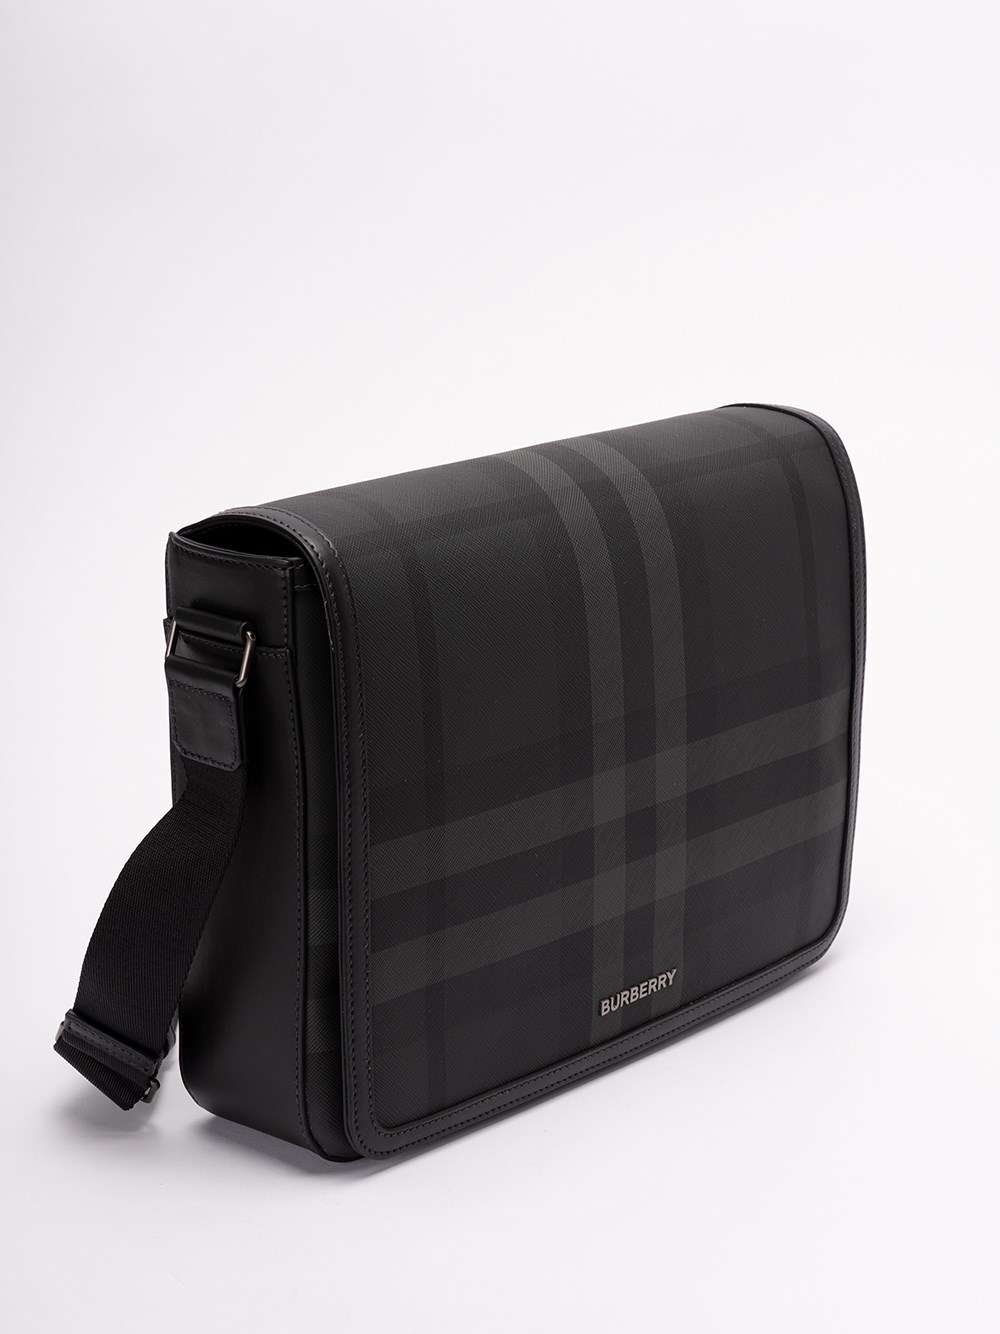 Small Alfred Messenger Bag in Charcoal - Men